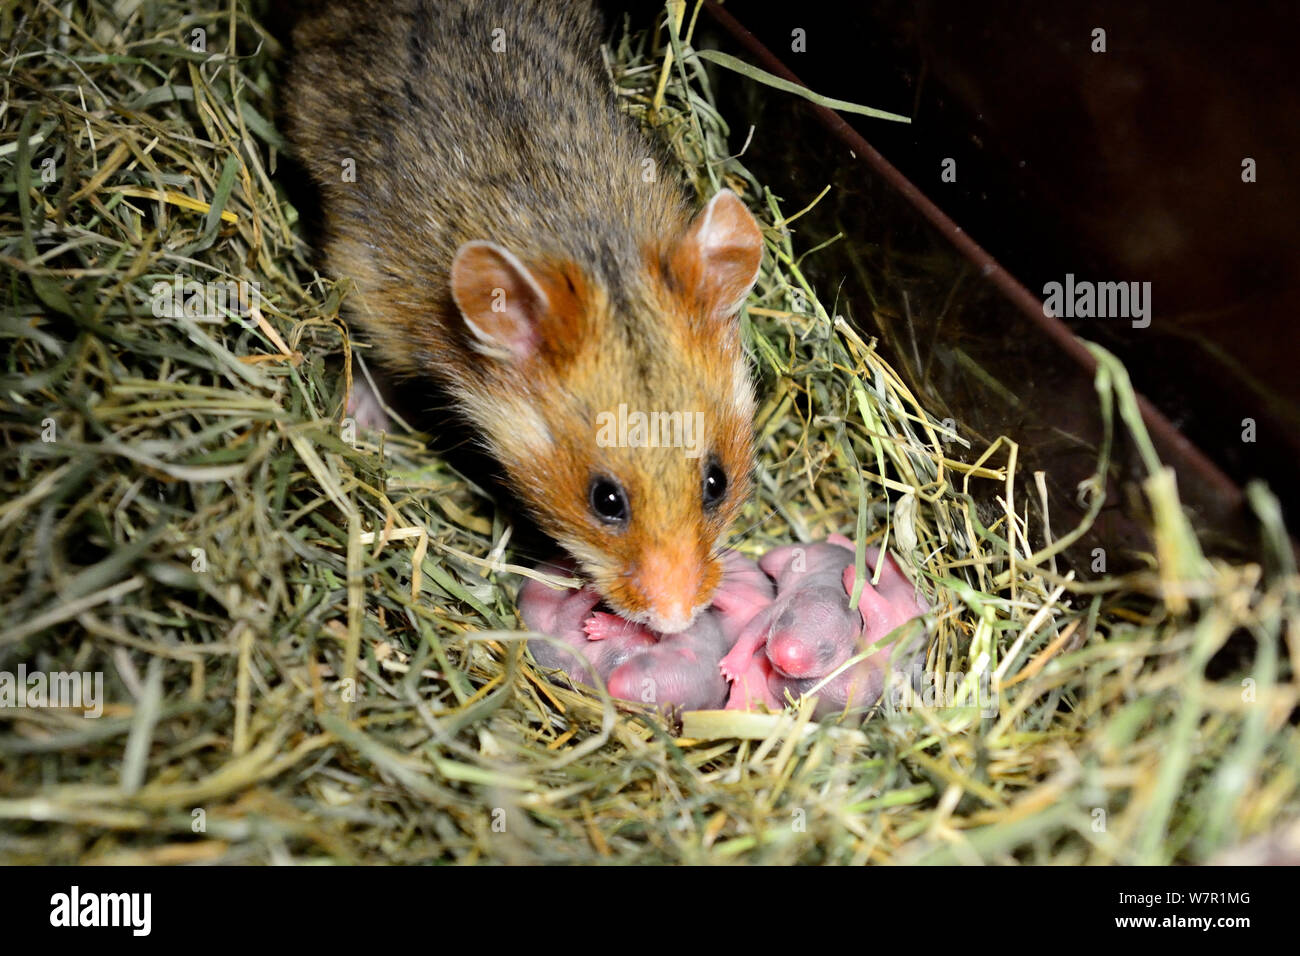 Female common hamster (Cricetus cricetus) with her newborn babies, age 2 days, Alsace, France, captive Stock Photo